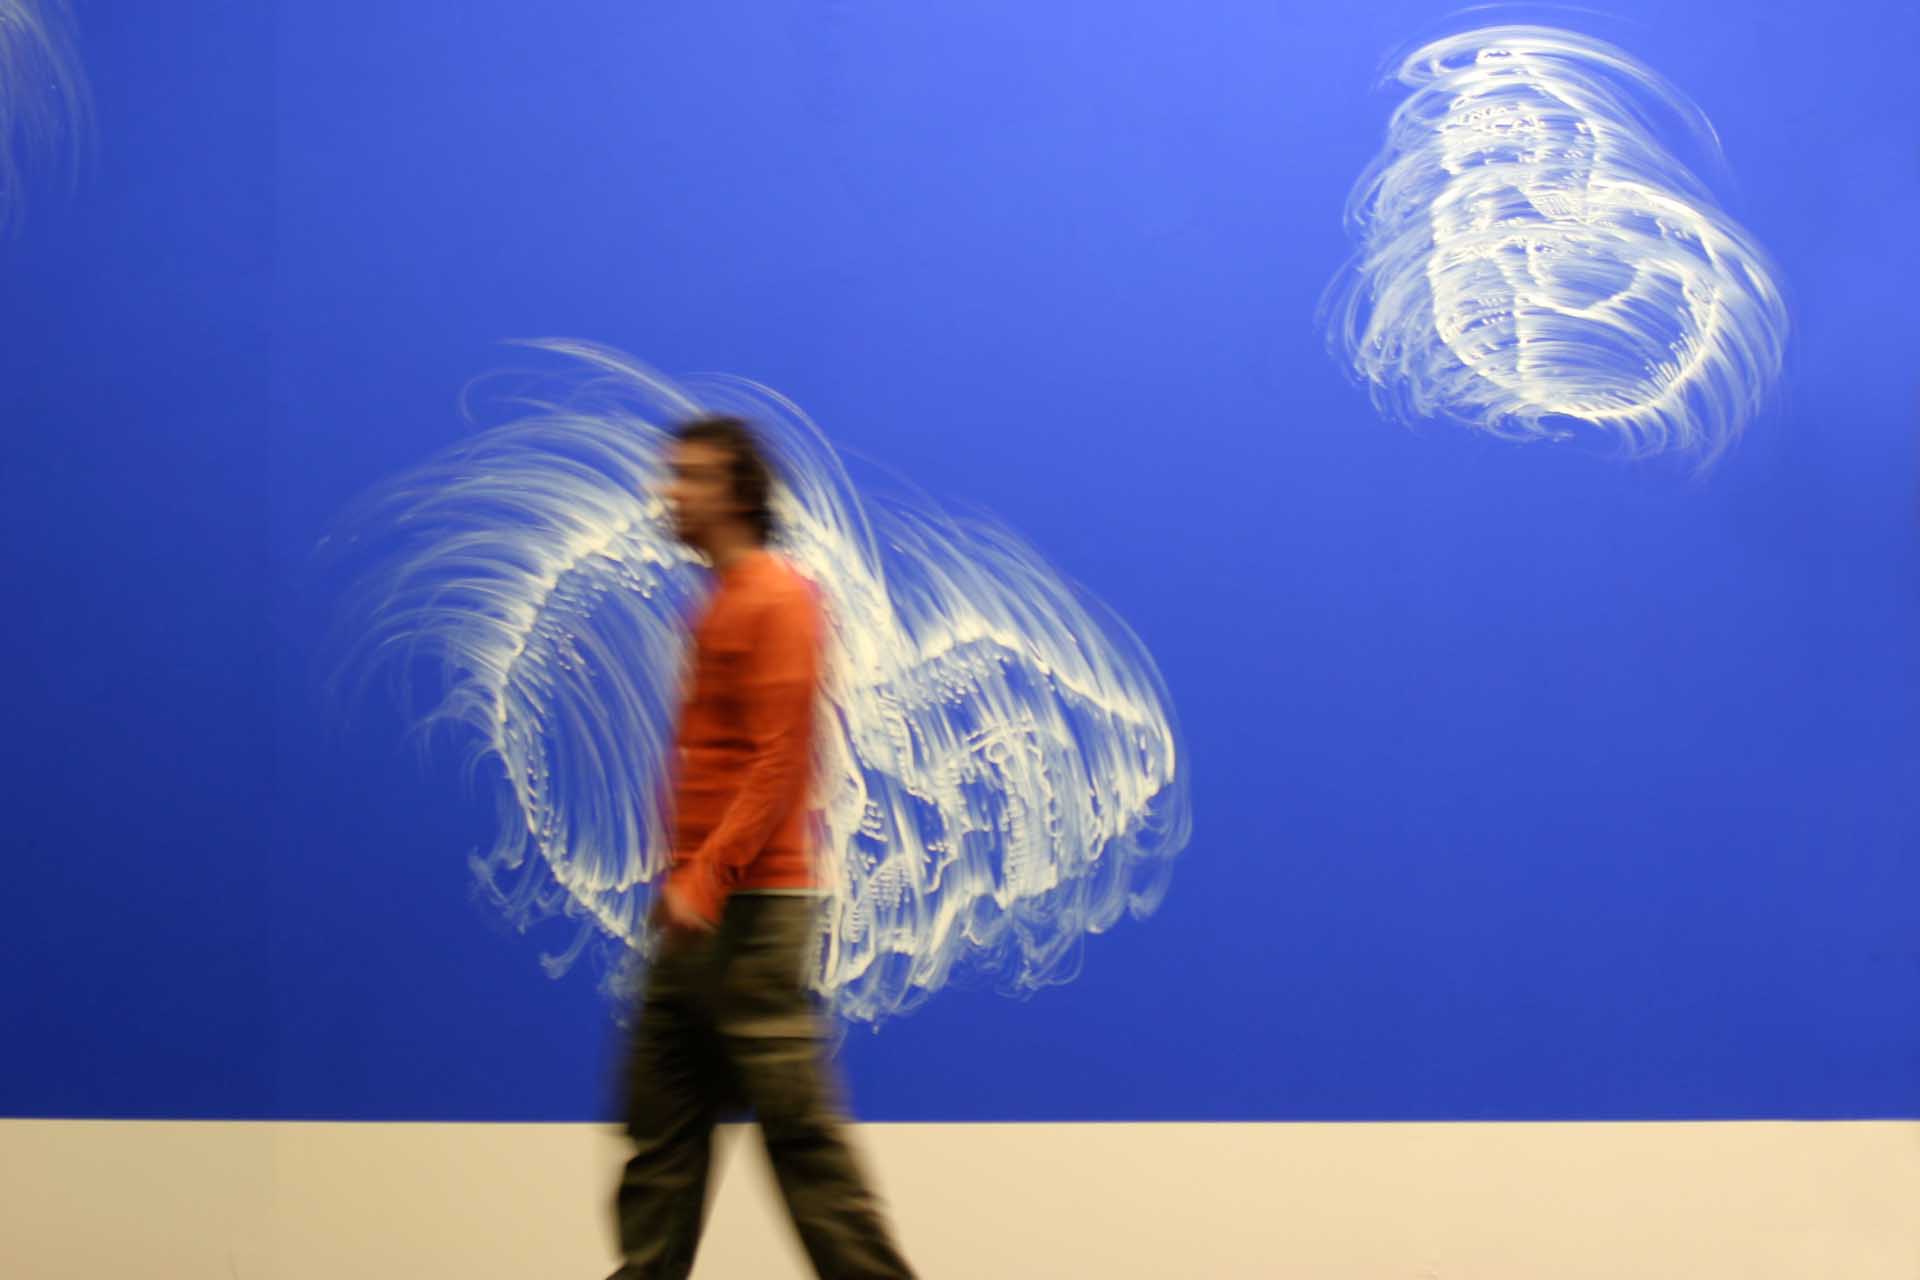 Art 38 Unlimited: Installation with a large blue painting by Gary Simmons: "Skull Spill", 2007